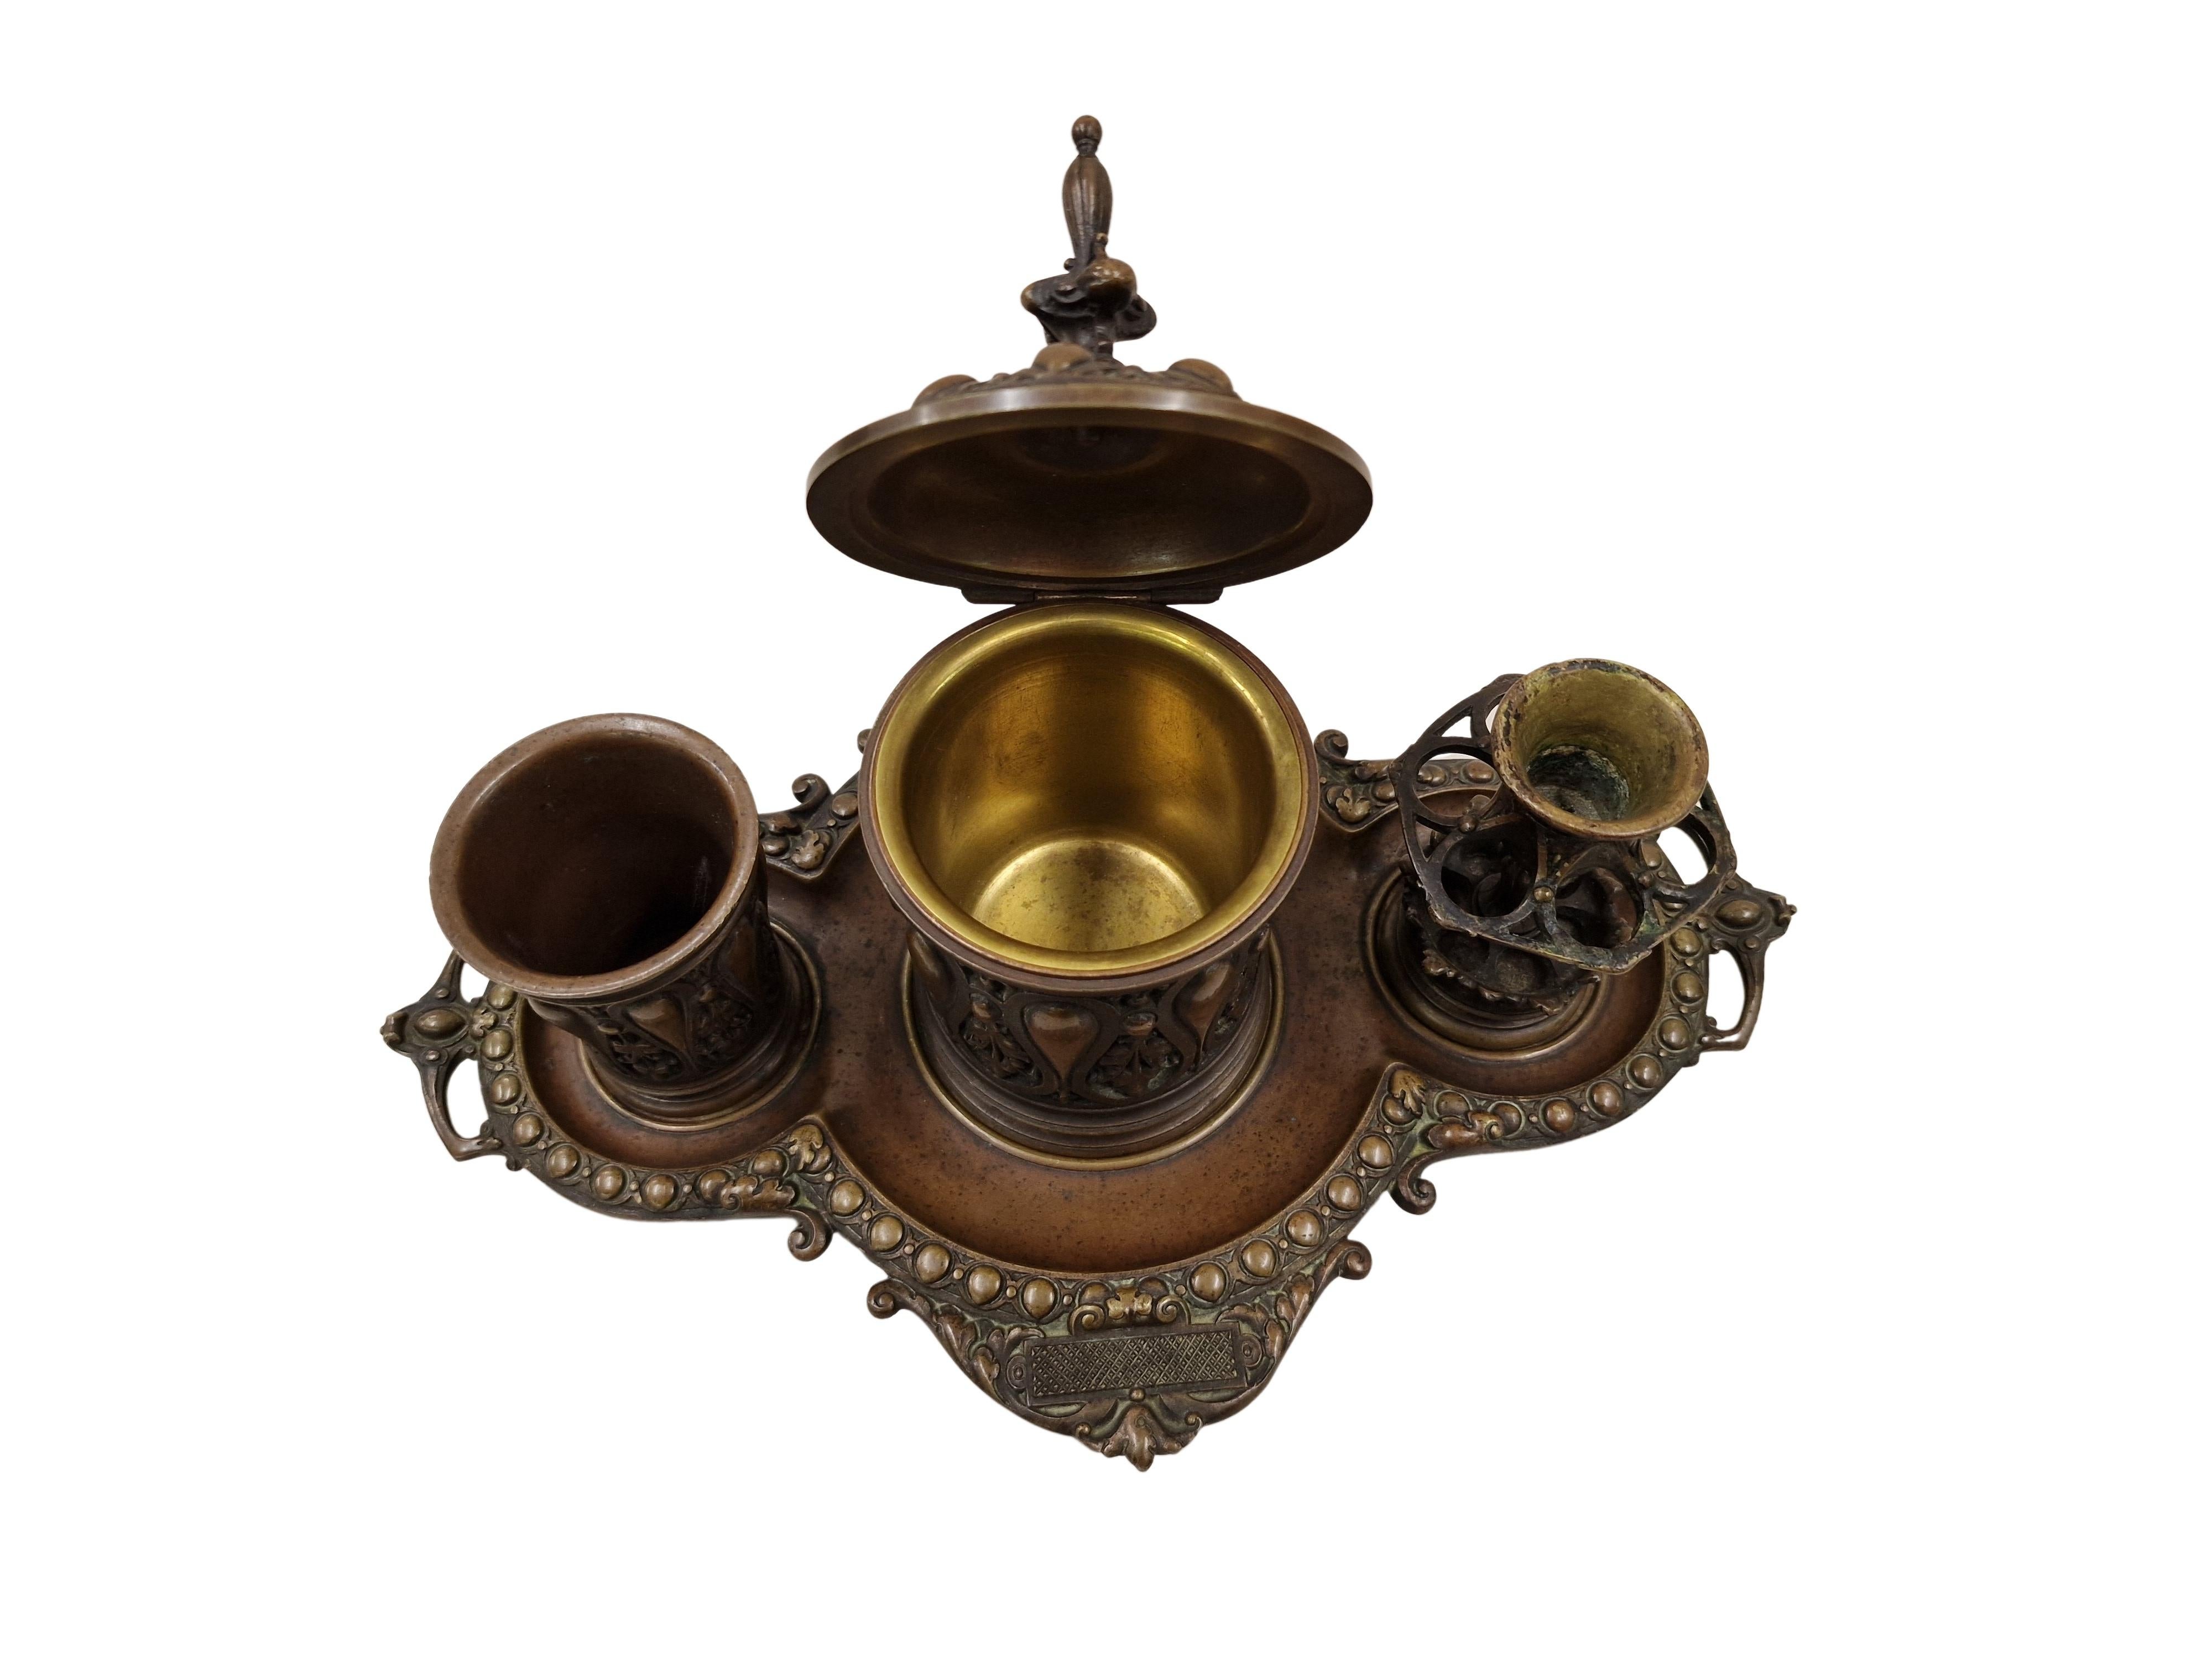 Very nice multi-piece smoking set out of solid bronze, made around 1880, in the end of the 19. Century, in Central Europe. 

The set is consisting of 4 pieces, a serving tray, a tobacco pot with brass insert, a cup for the ashes / igniters and the